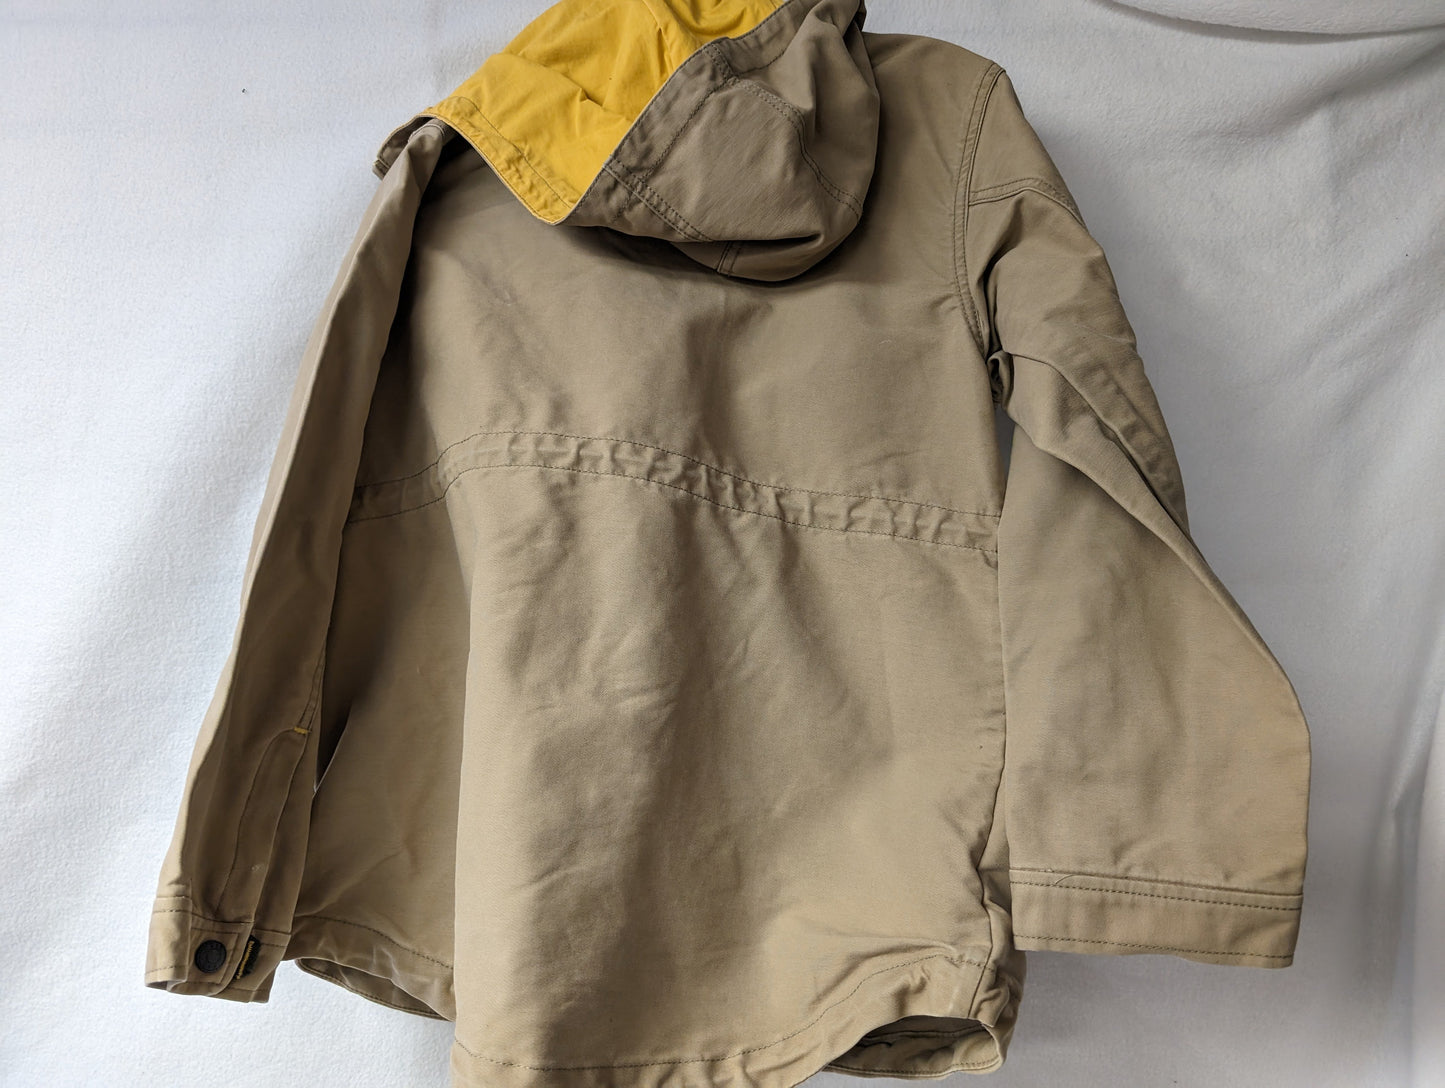 Gap Youth Hooded Barn Jacket Coat Size Youth XL Color Tan Condition Used